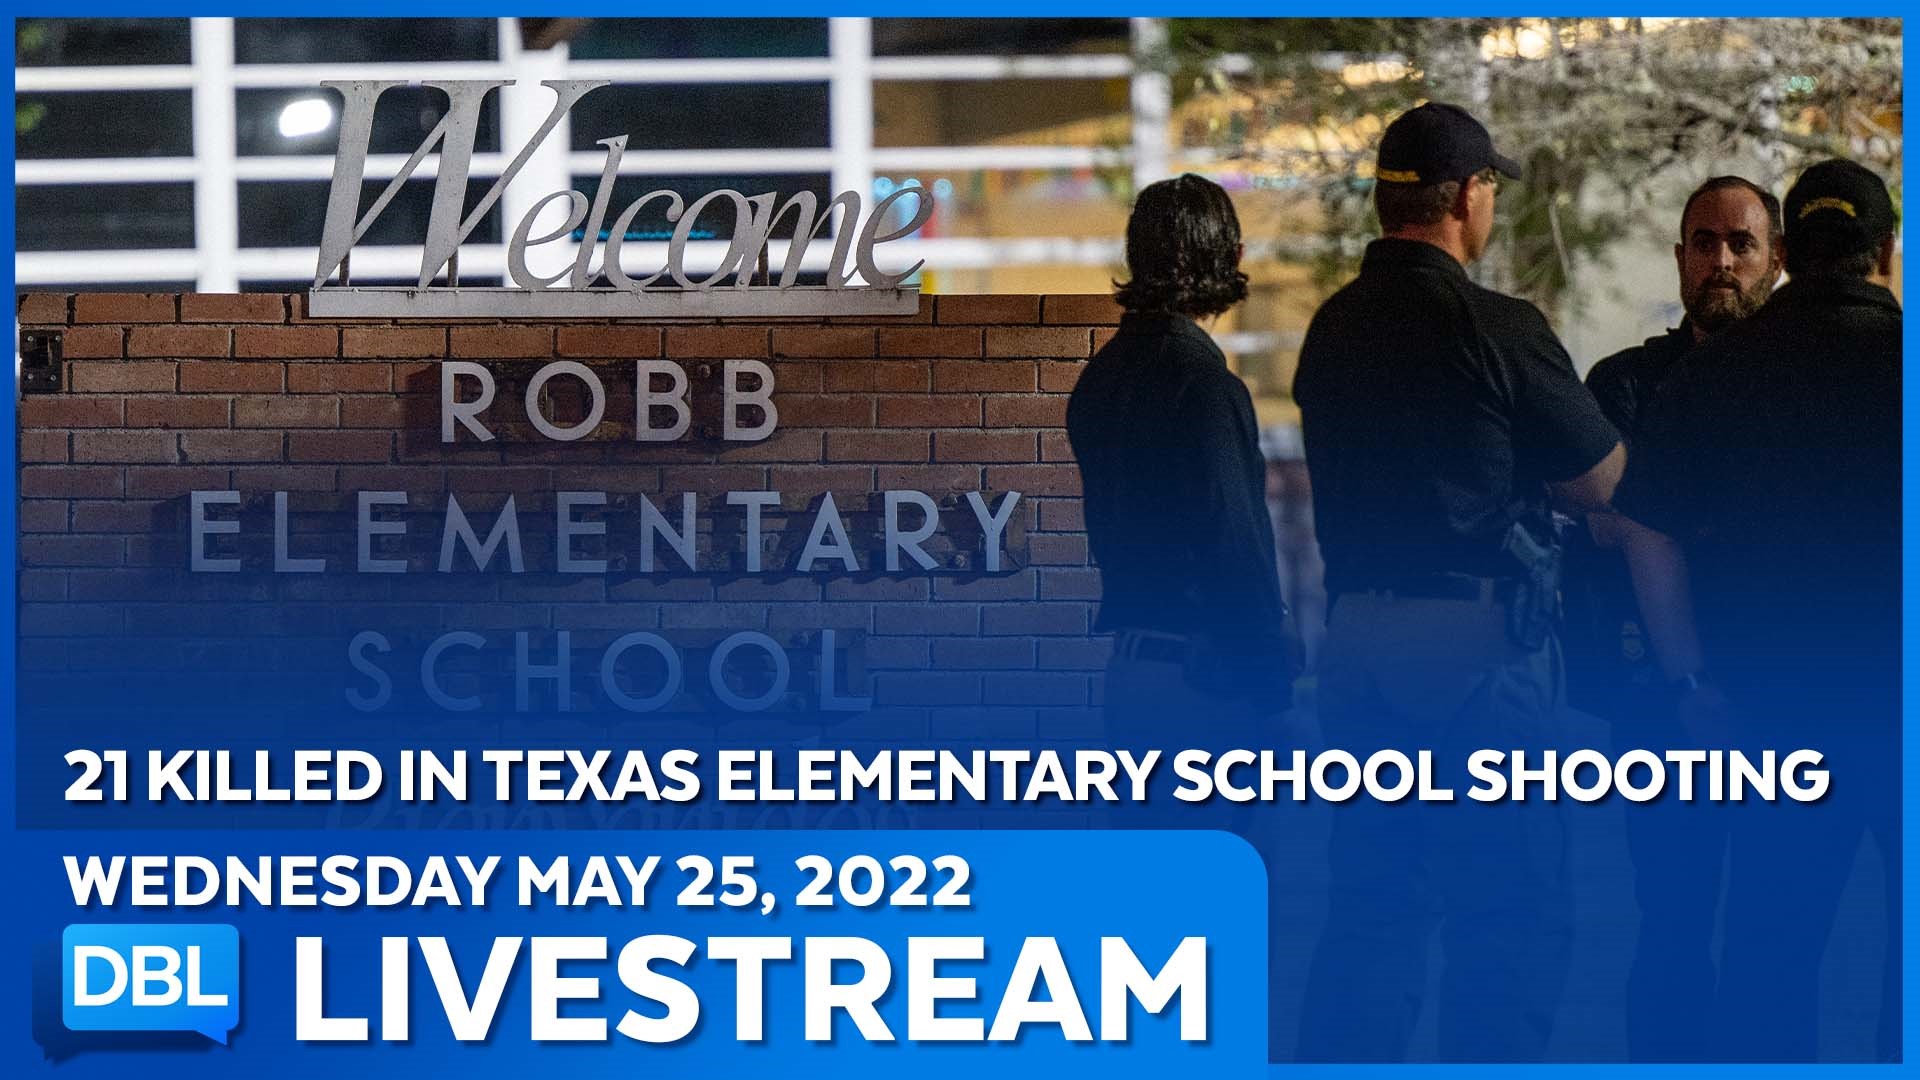 A nation in mourning after a massacre at a Texas elementary school.